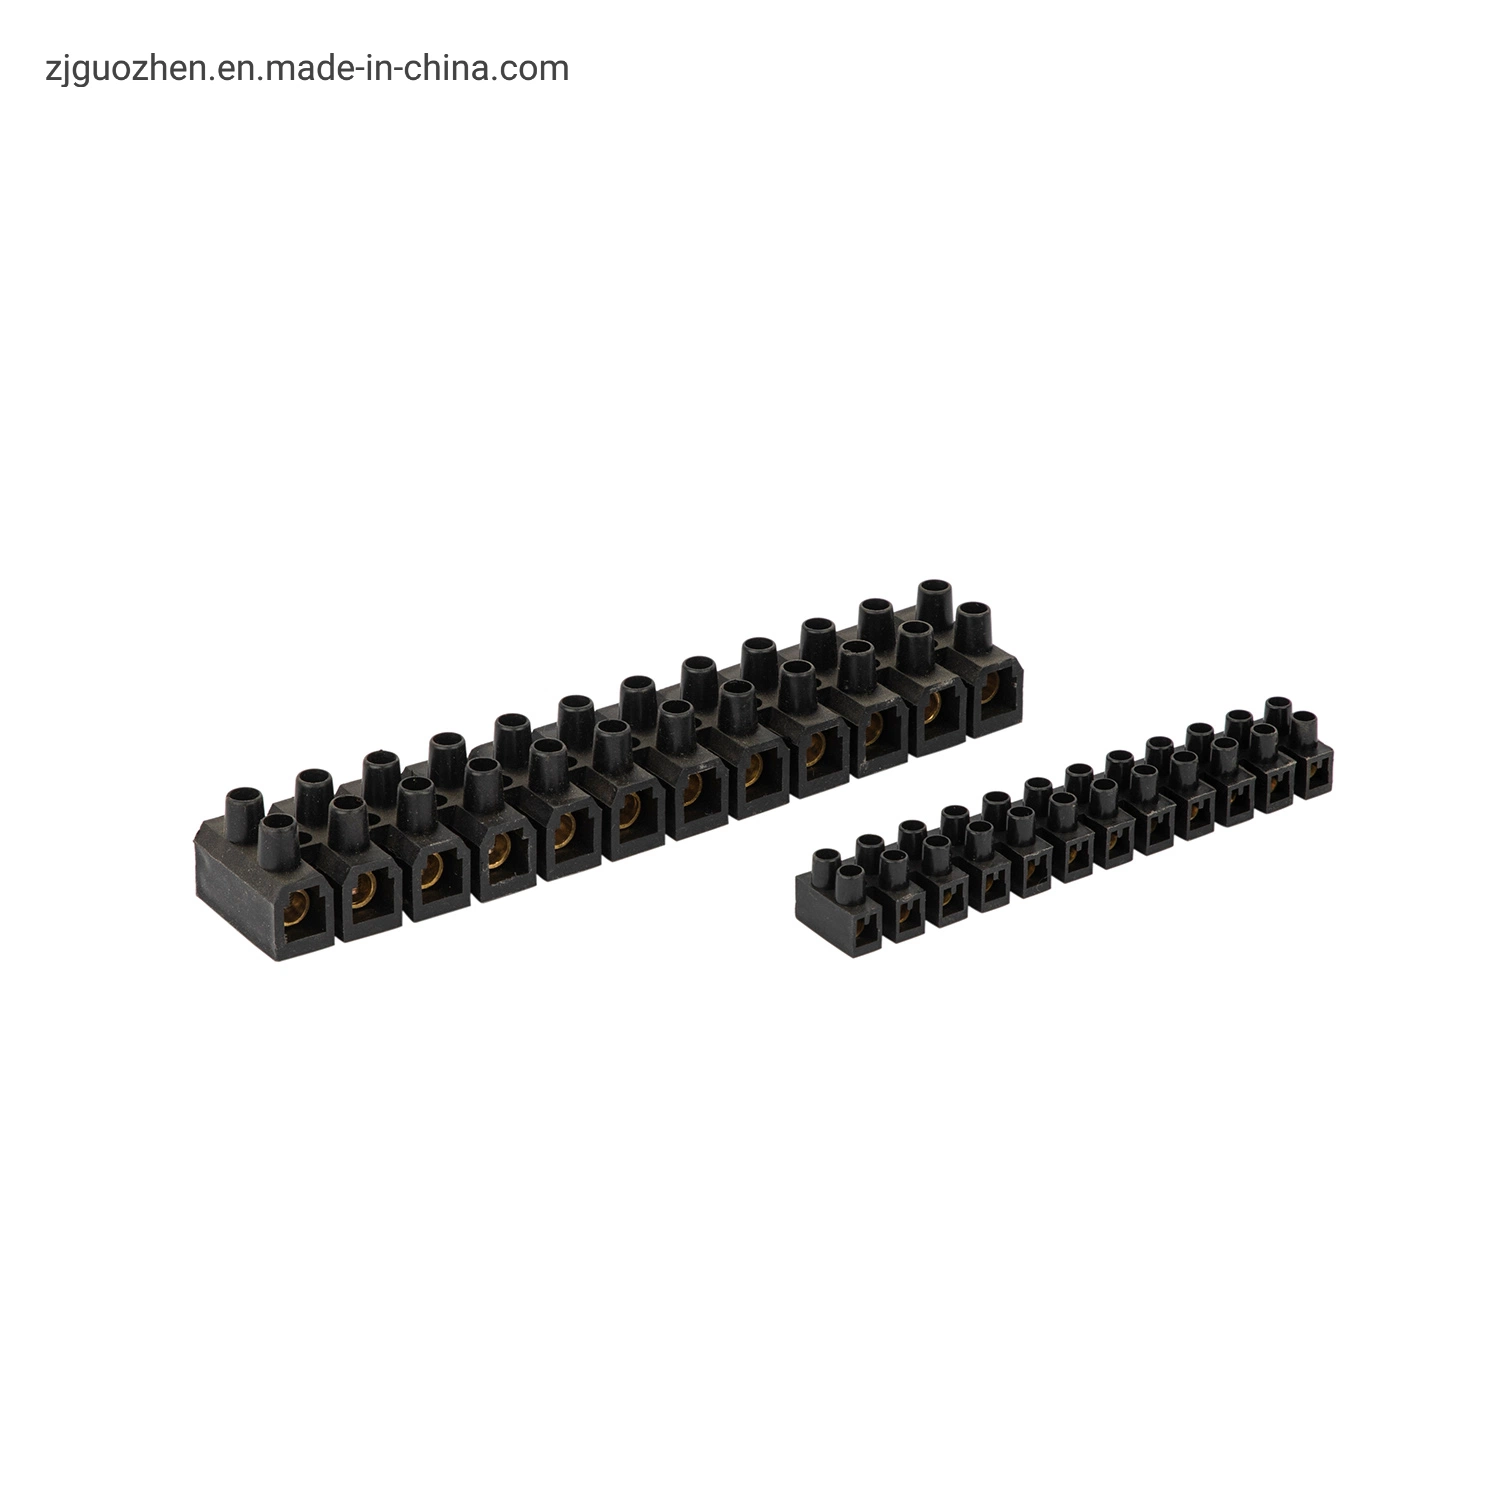 High Quality Male and Female Plug Gable Connector PCB Terminal Block